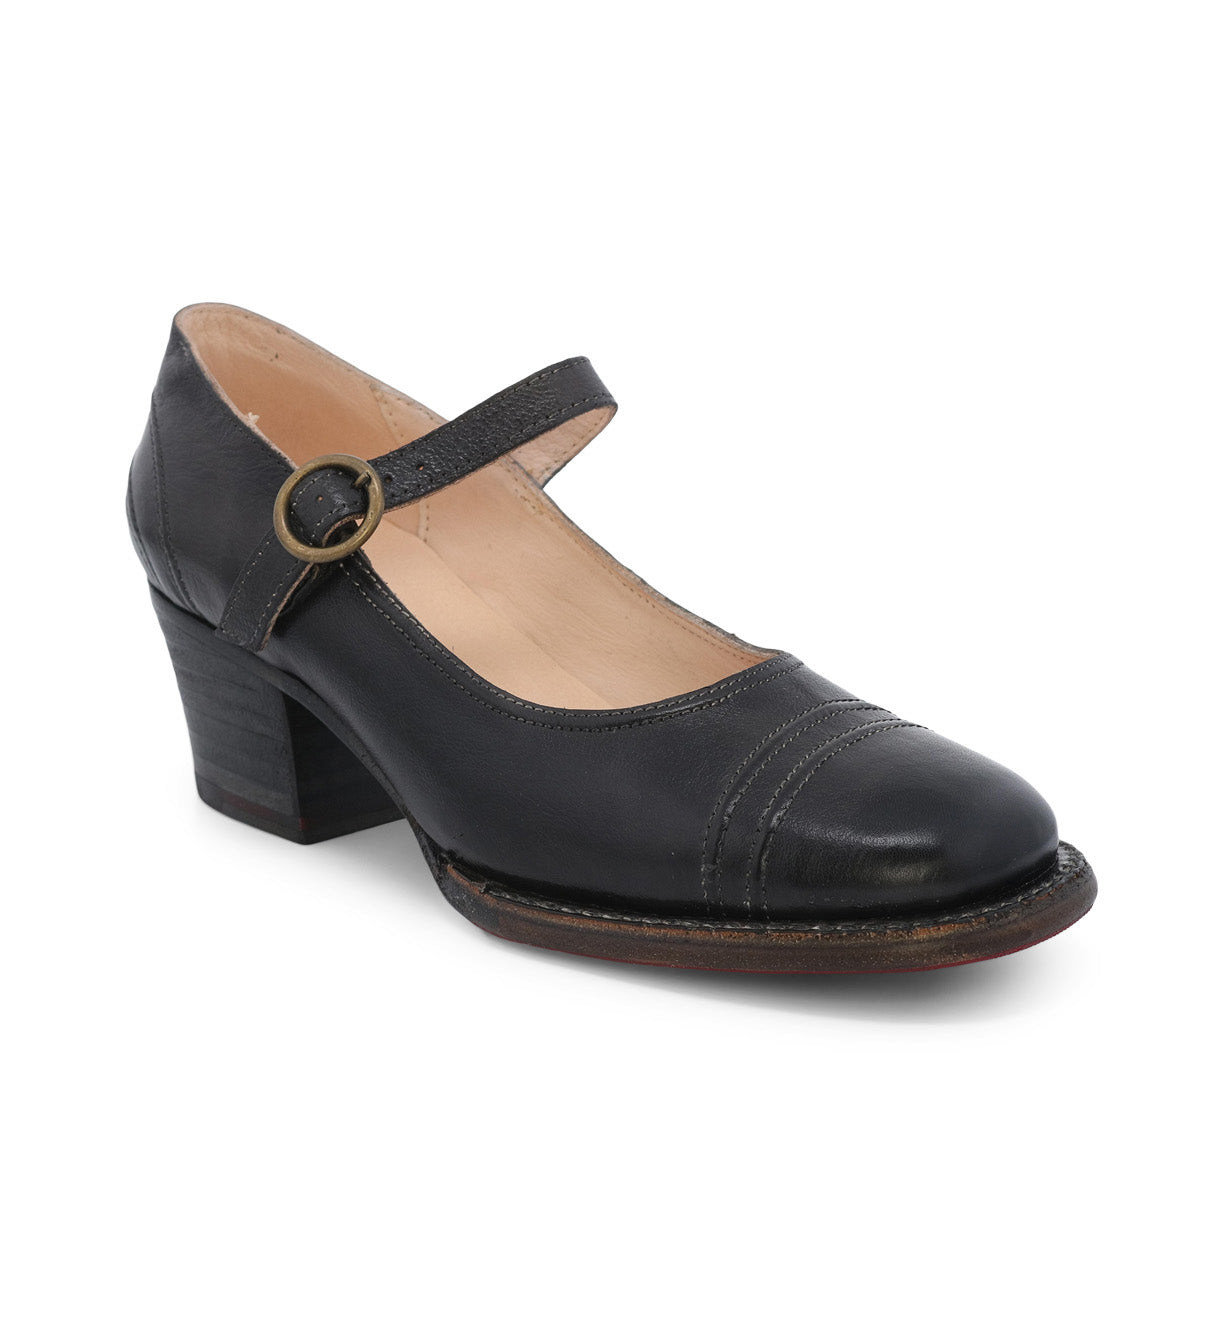 The Oak Tree Farms Twigley women's black leather Mary Jane shoe is a timeless classic with a buckle.